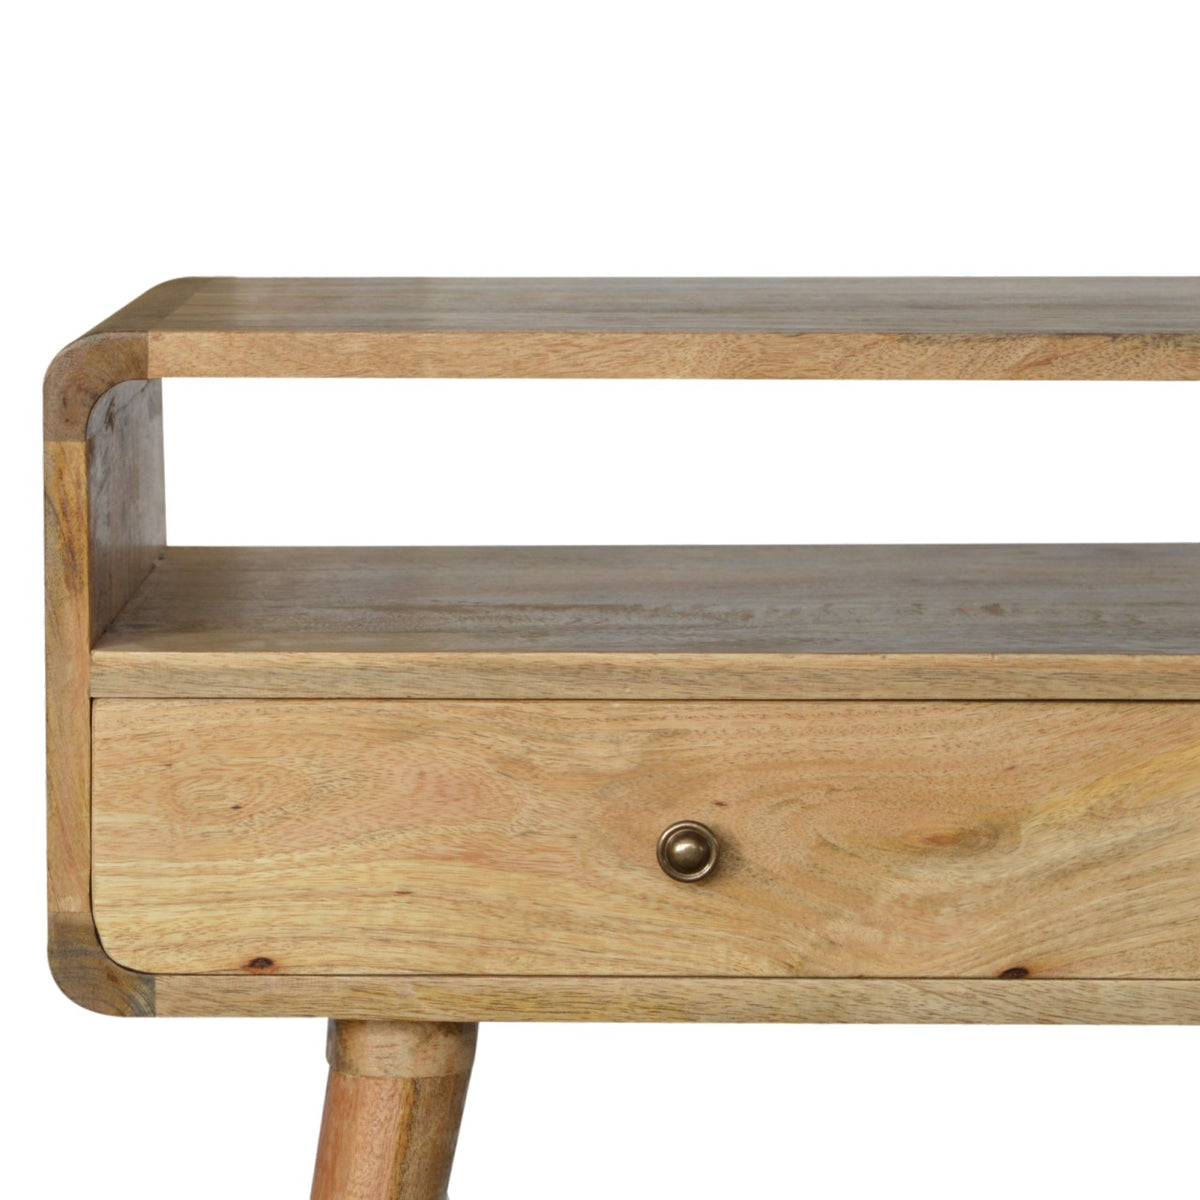 Handmade Oak-ish Tall Modern Console Table for sale uk online